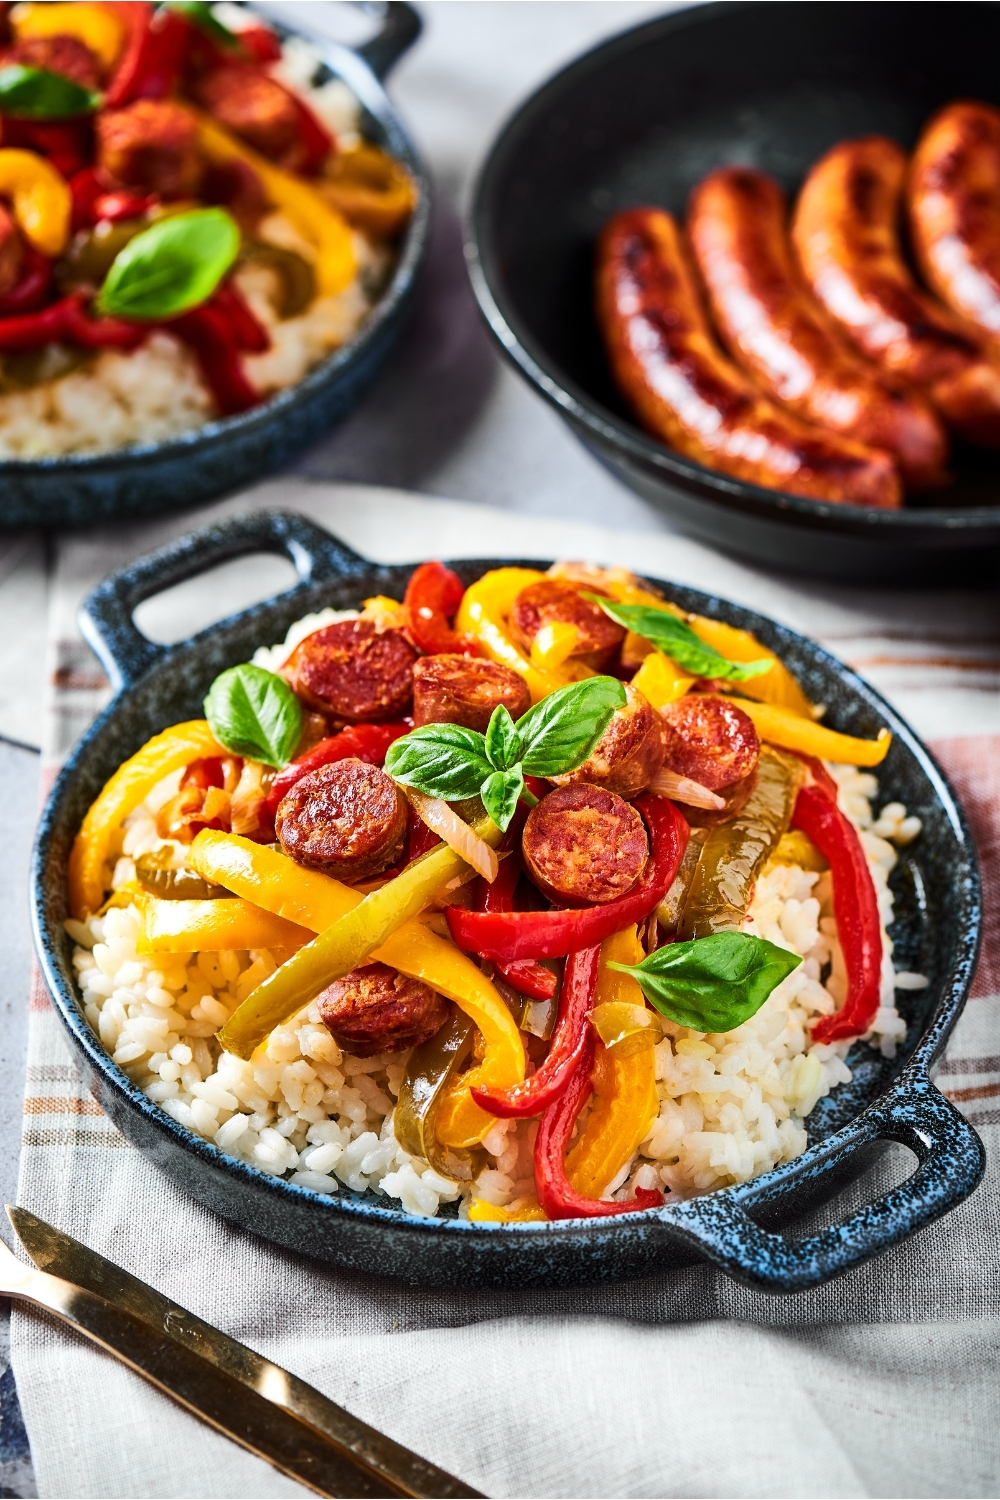 A bowl filled with white rice, sliced red, green, and yellow peppers and onions, and slices of sausage white rice. The bowl is on a plaid tablecloth and behind it is part of a pan with three cooked sausages on it next to that another bowl with rice, sausage, peppers and onions.